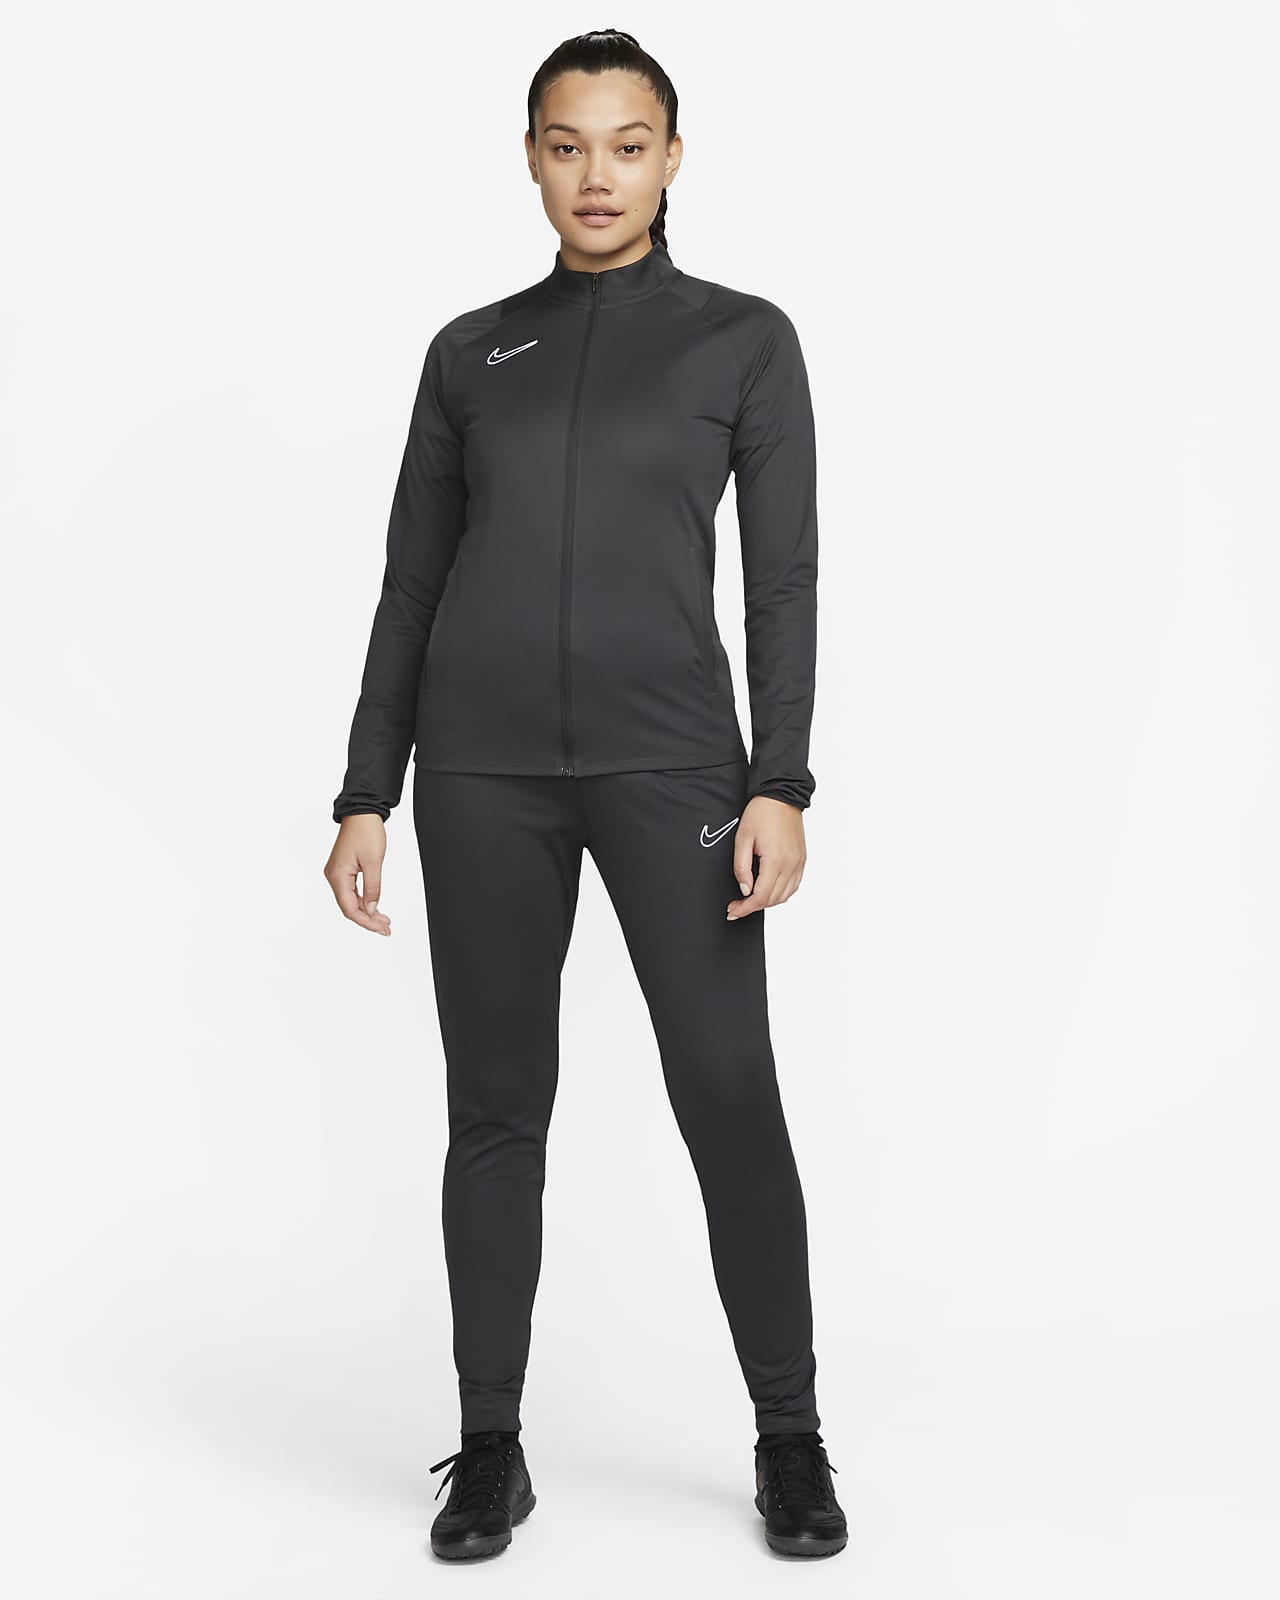 Women's Nike Tracksuits and sweat suits from $48